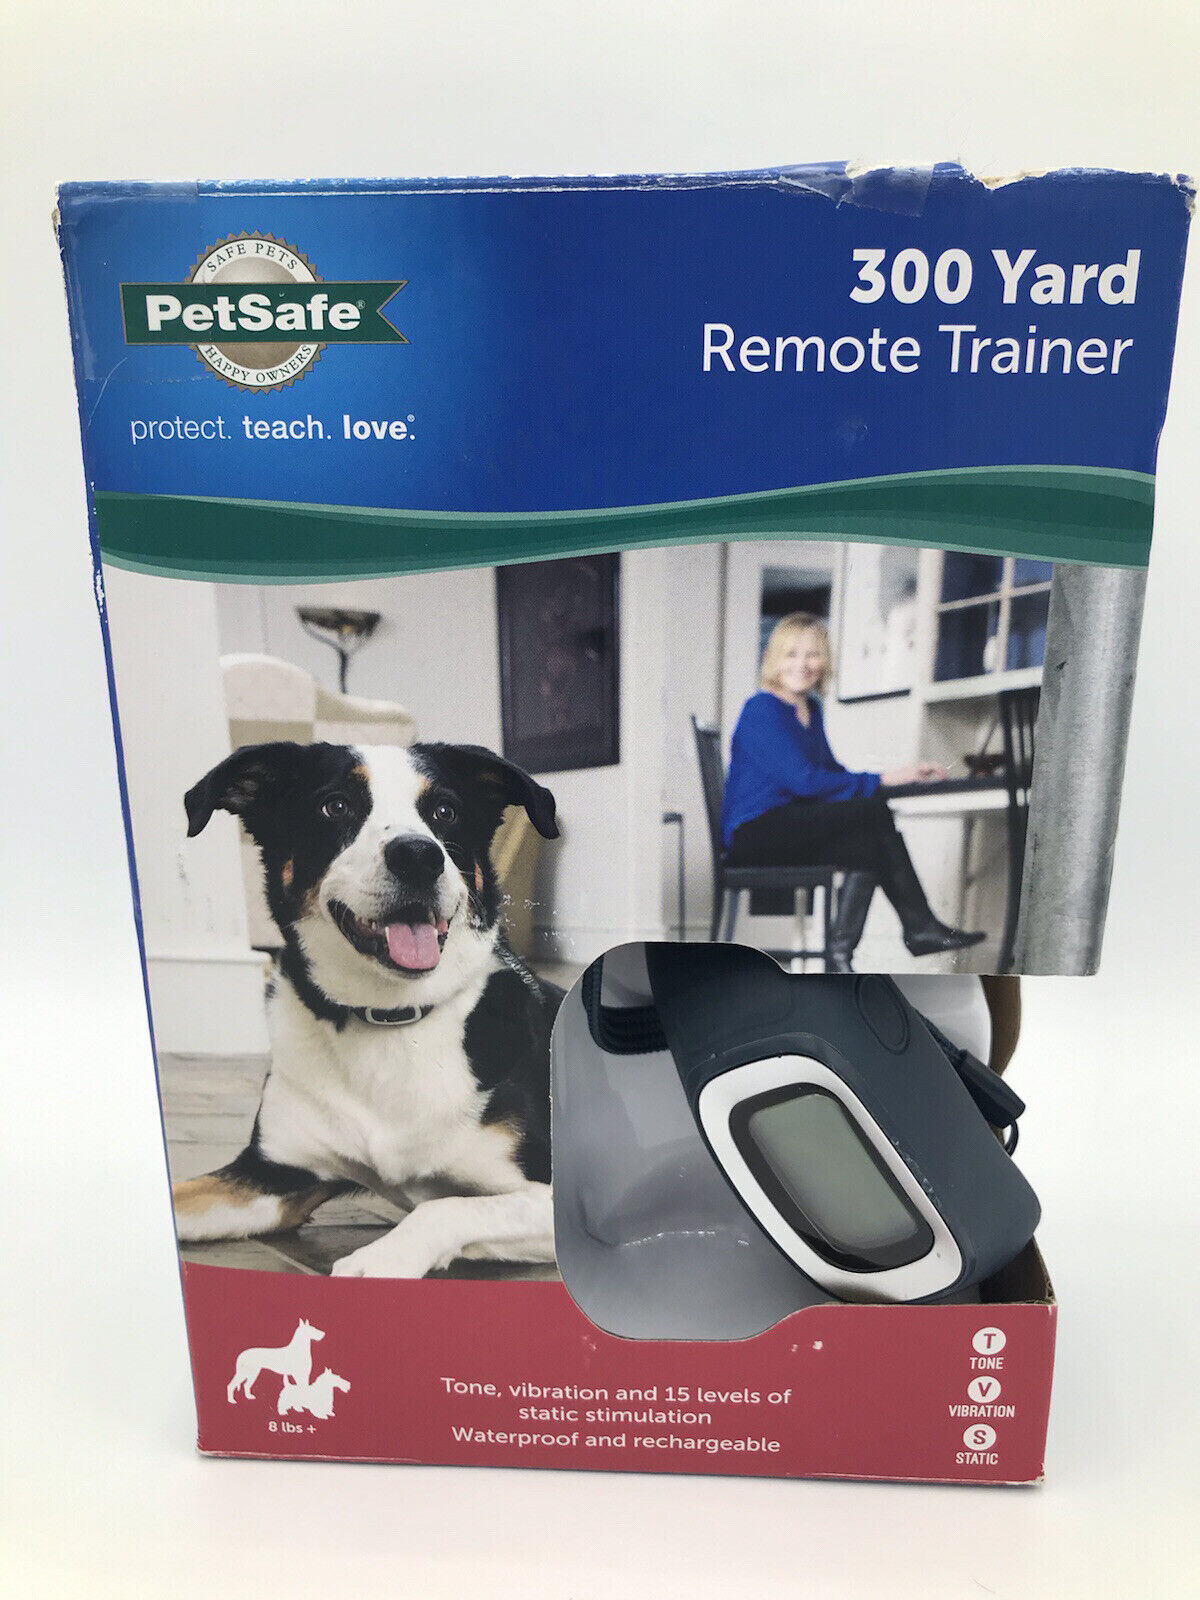 PetSafe 300 Yard Remote Trainer PDT00-16117 for Dogs 8 lbs+